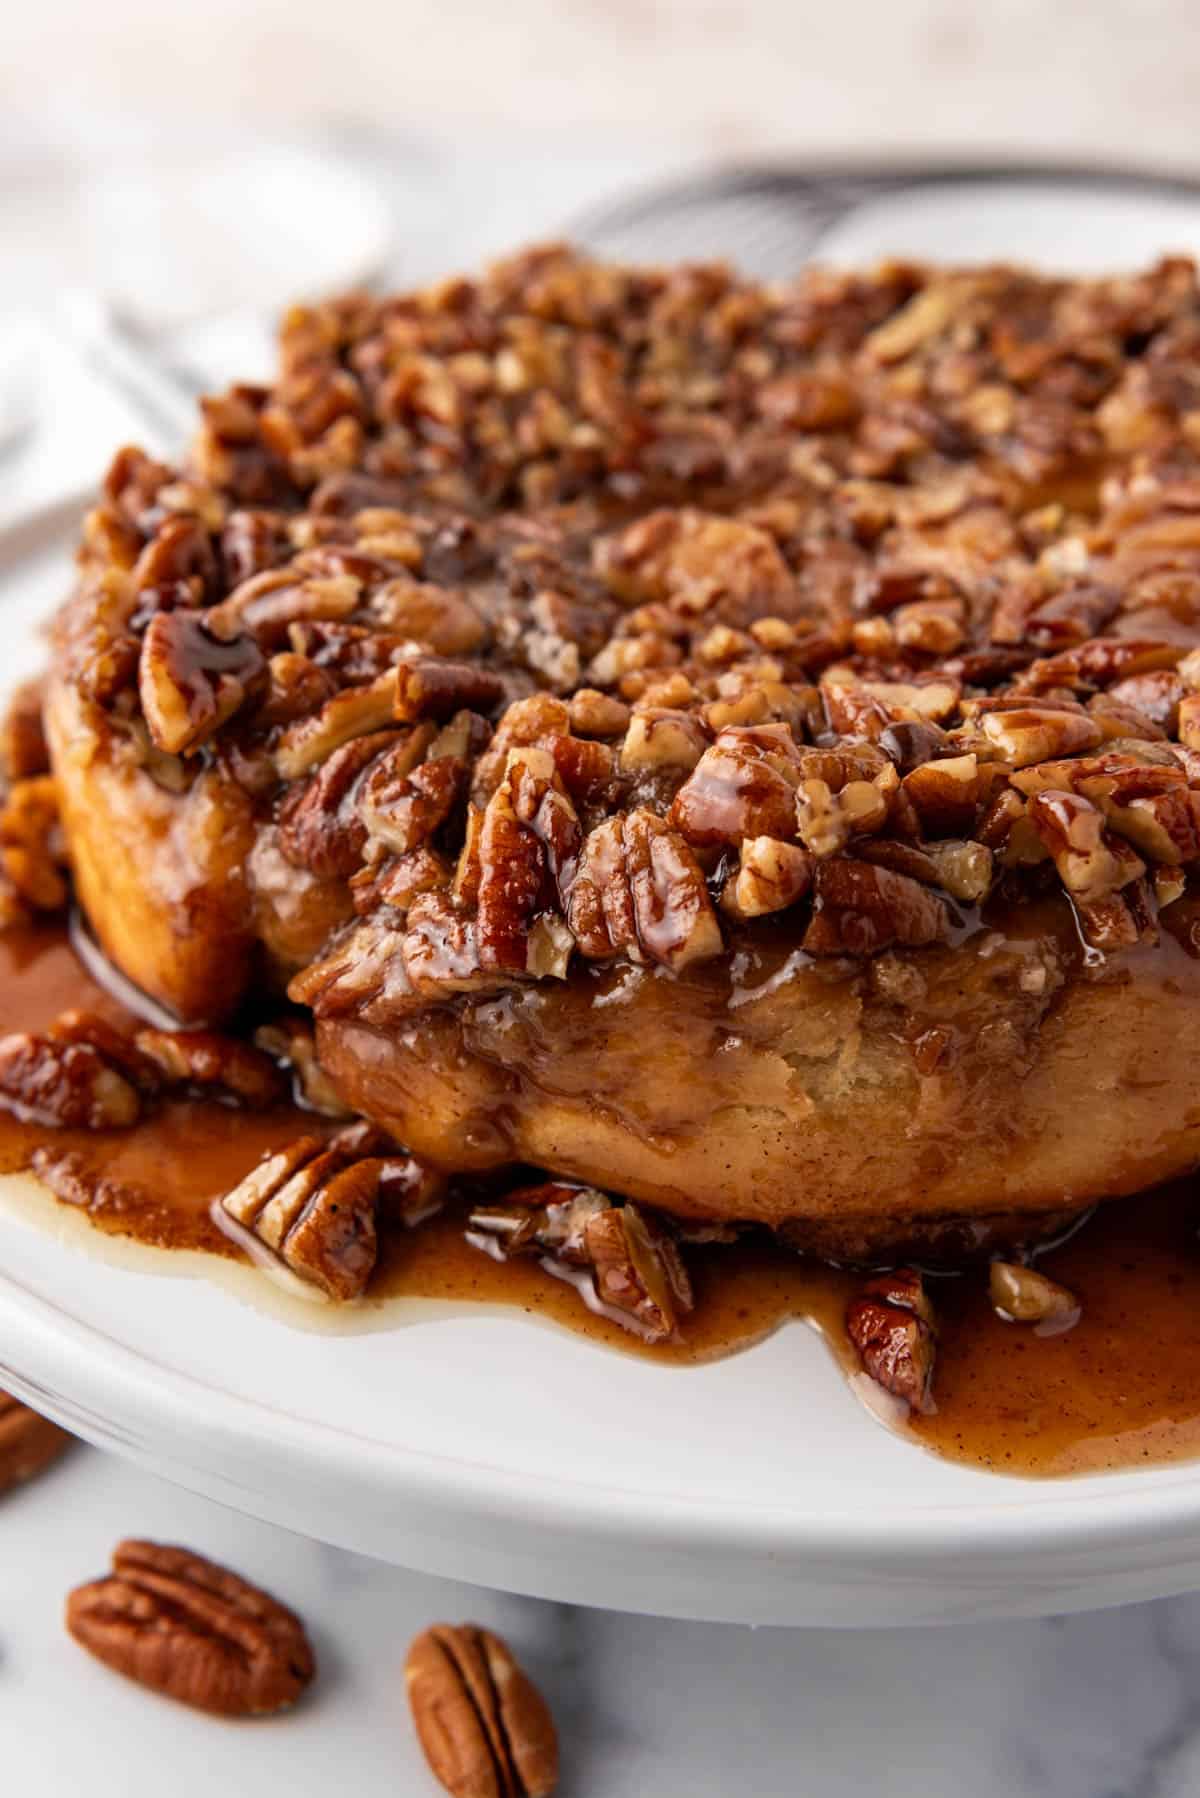 A close up image of sticky buns that have been turned out of their pan with the chopped pecans and caramel sauce on top.